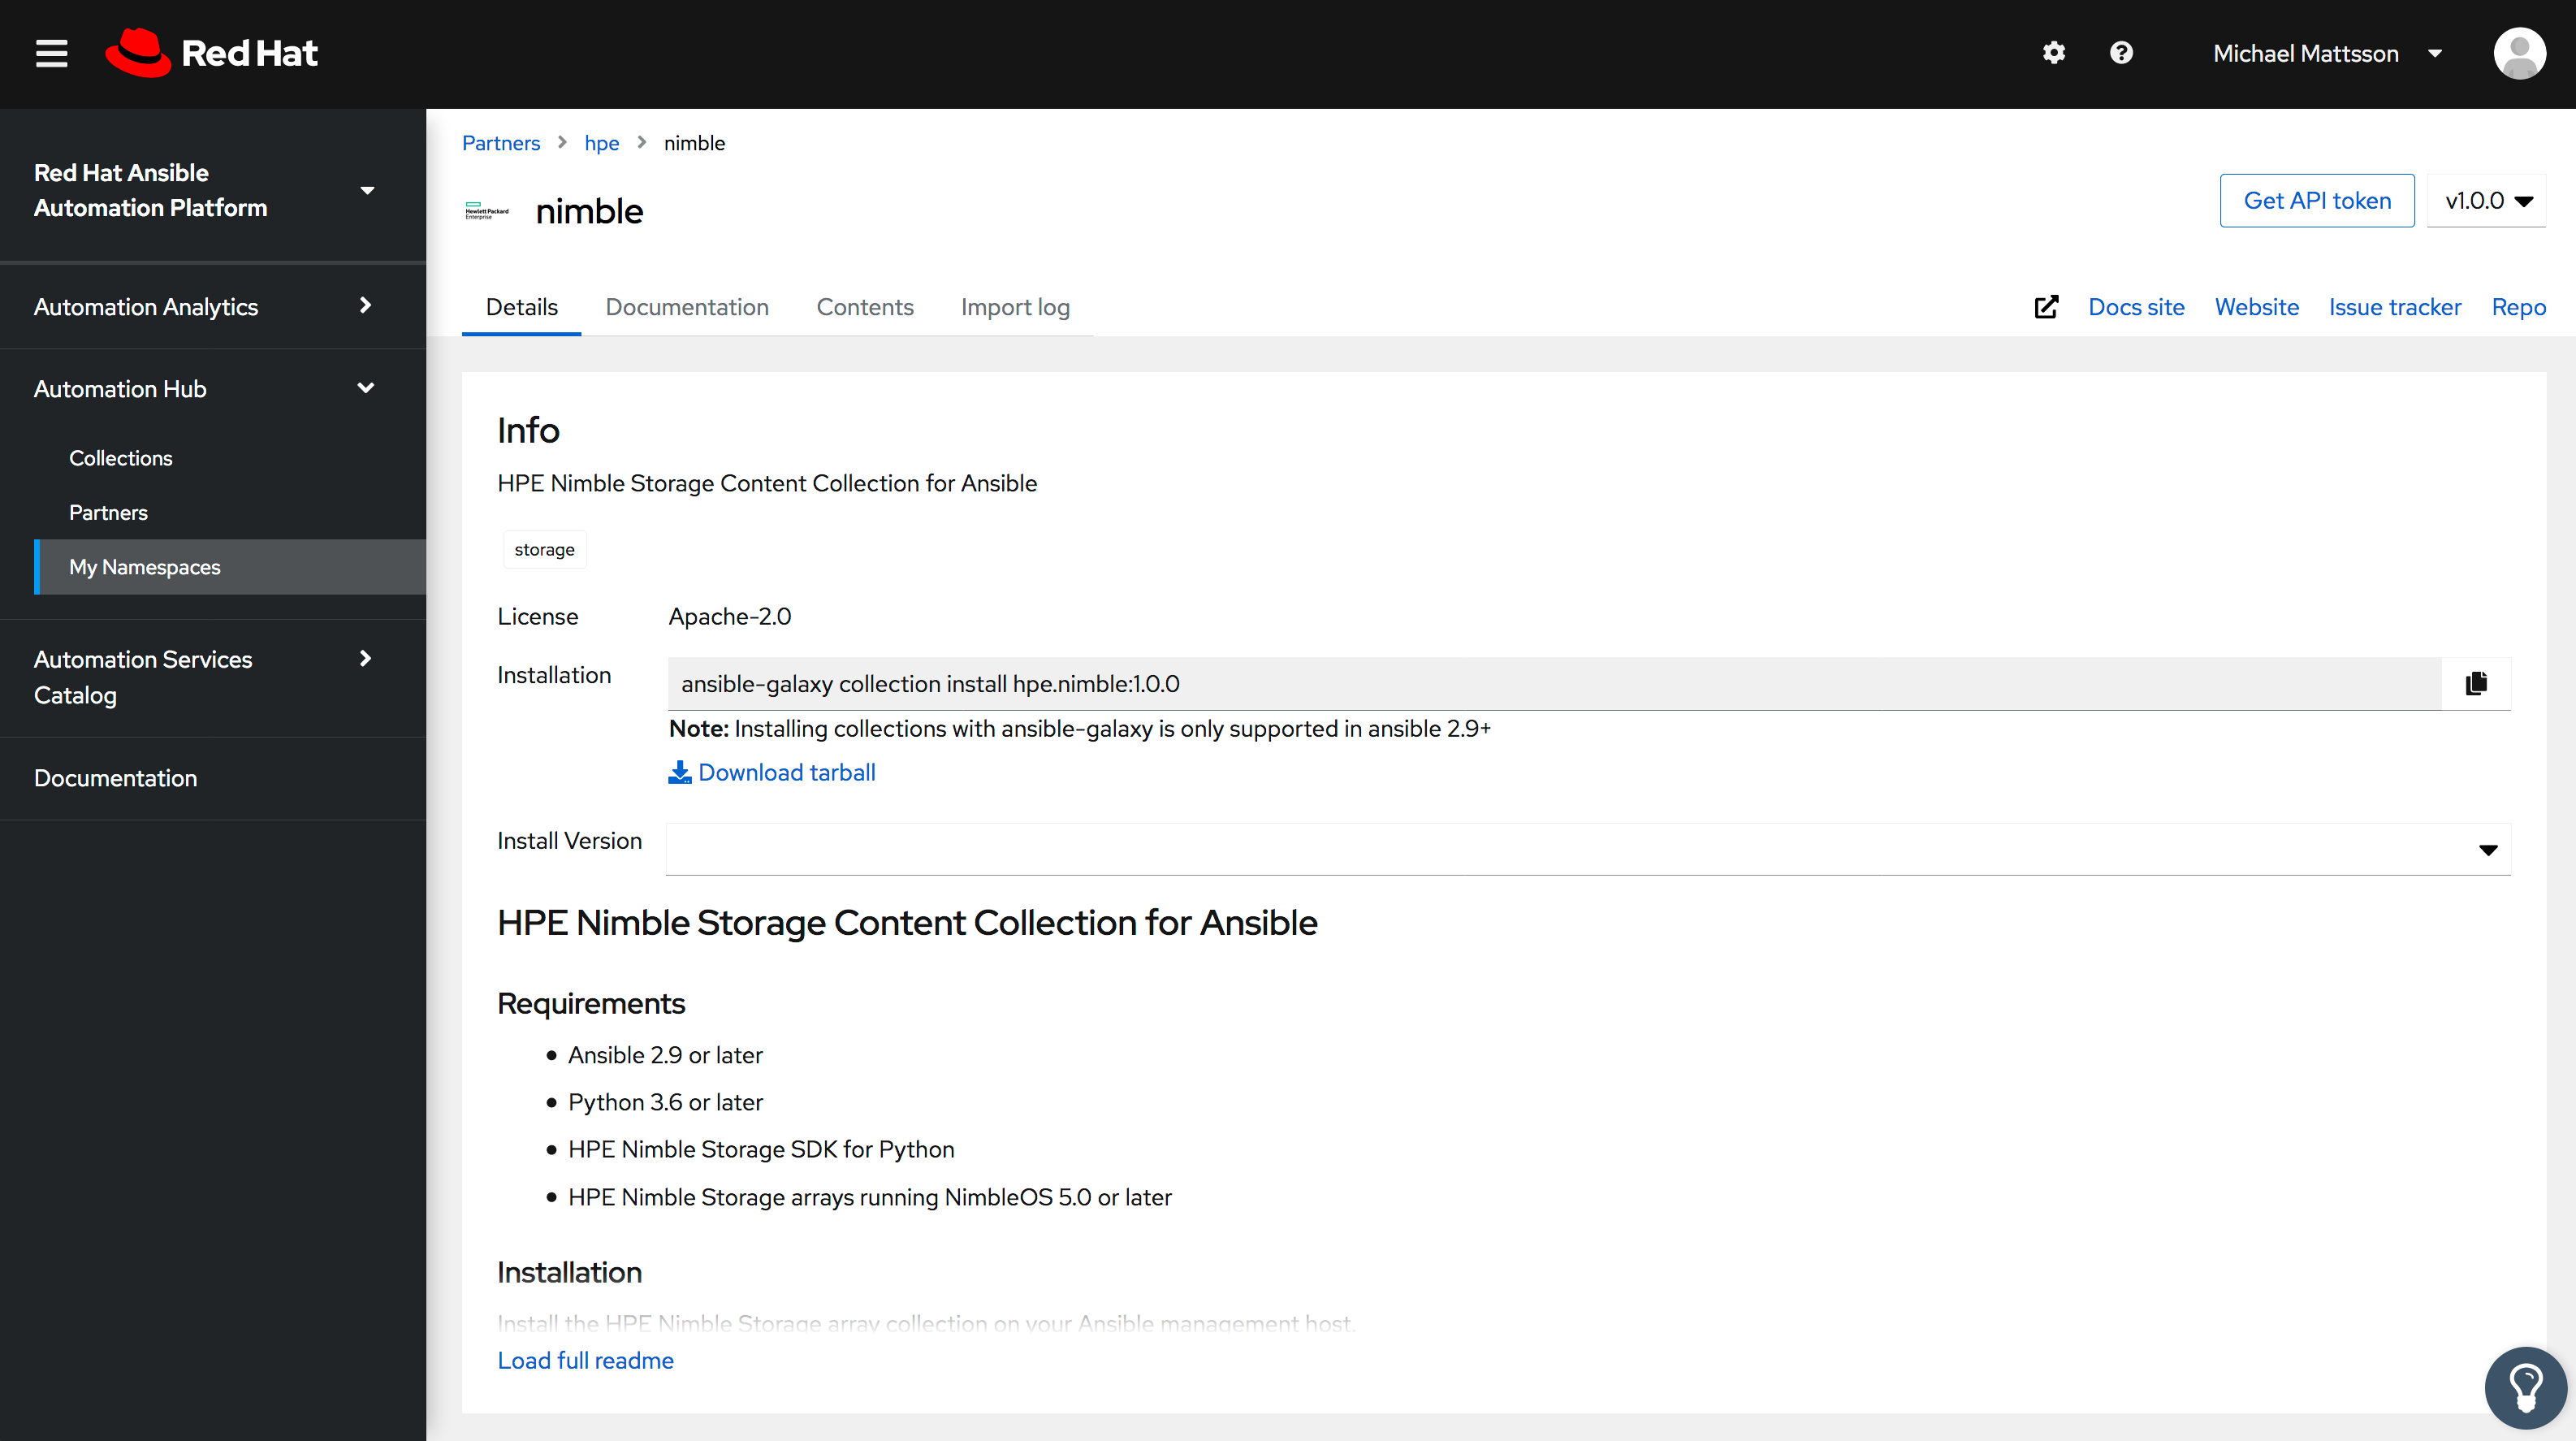 HPE Nimble Storage Content Collection for Ansbile